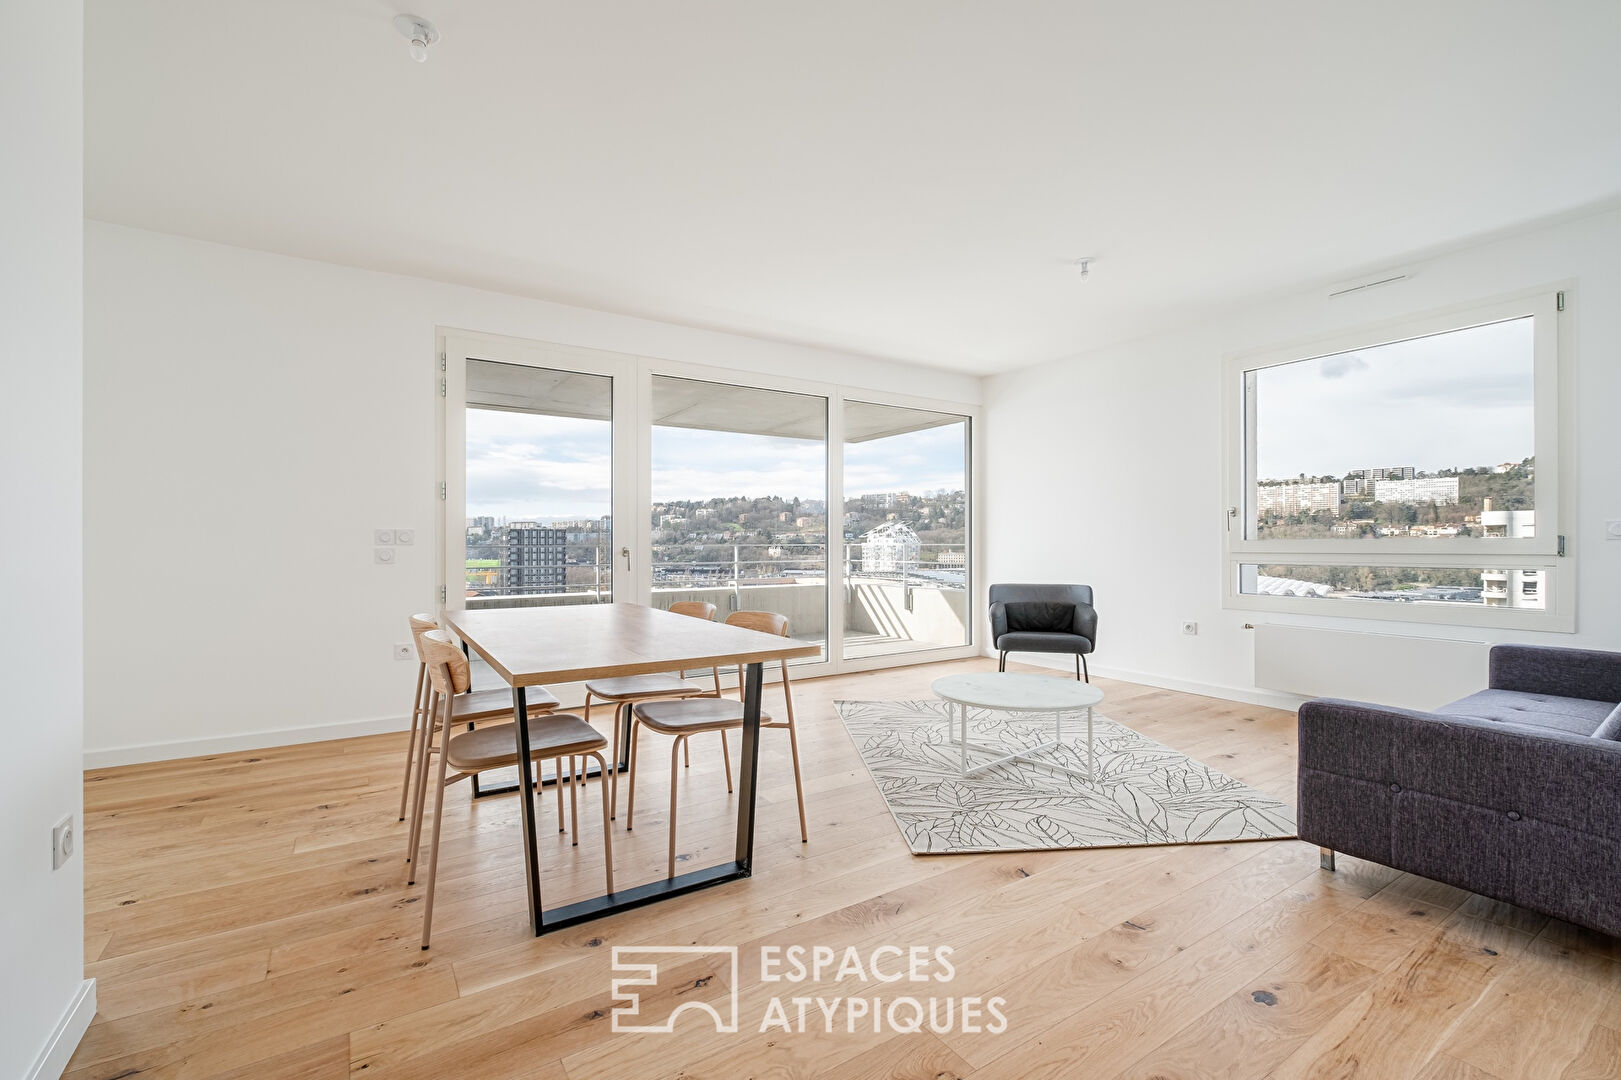 Family apartment with panoramic view in the heart of the Confluence district